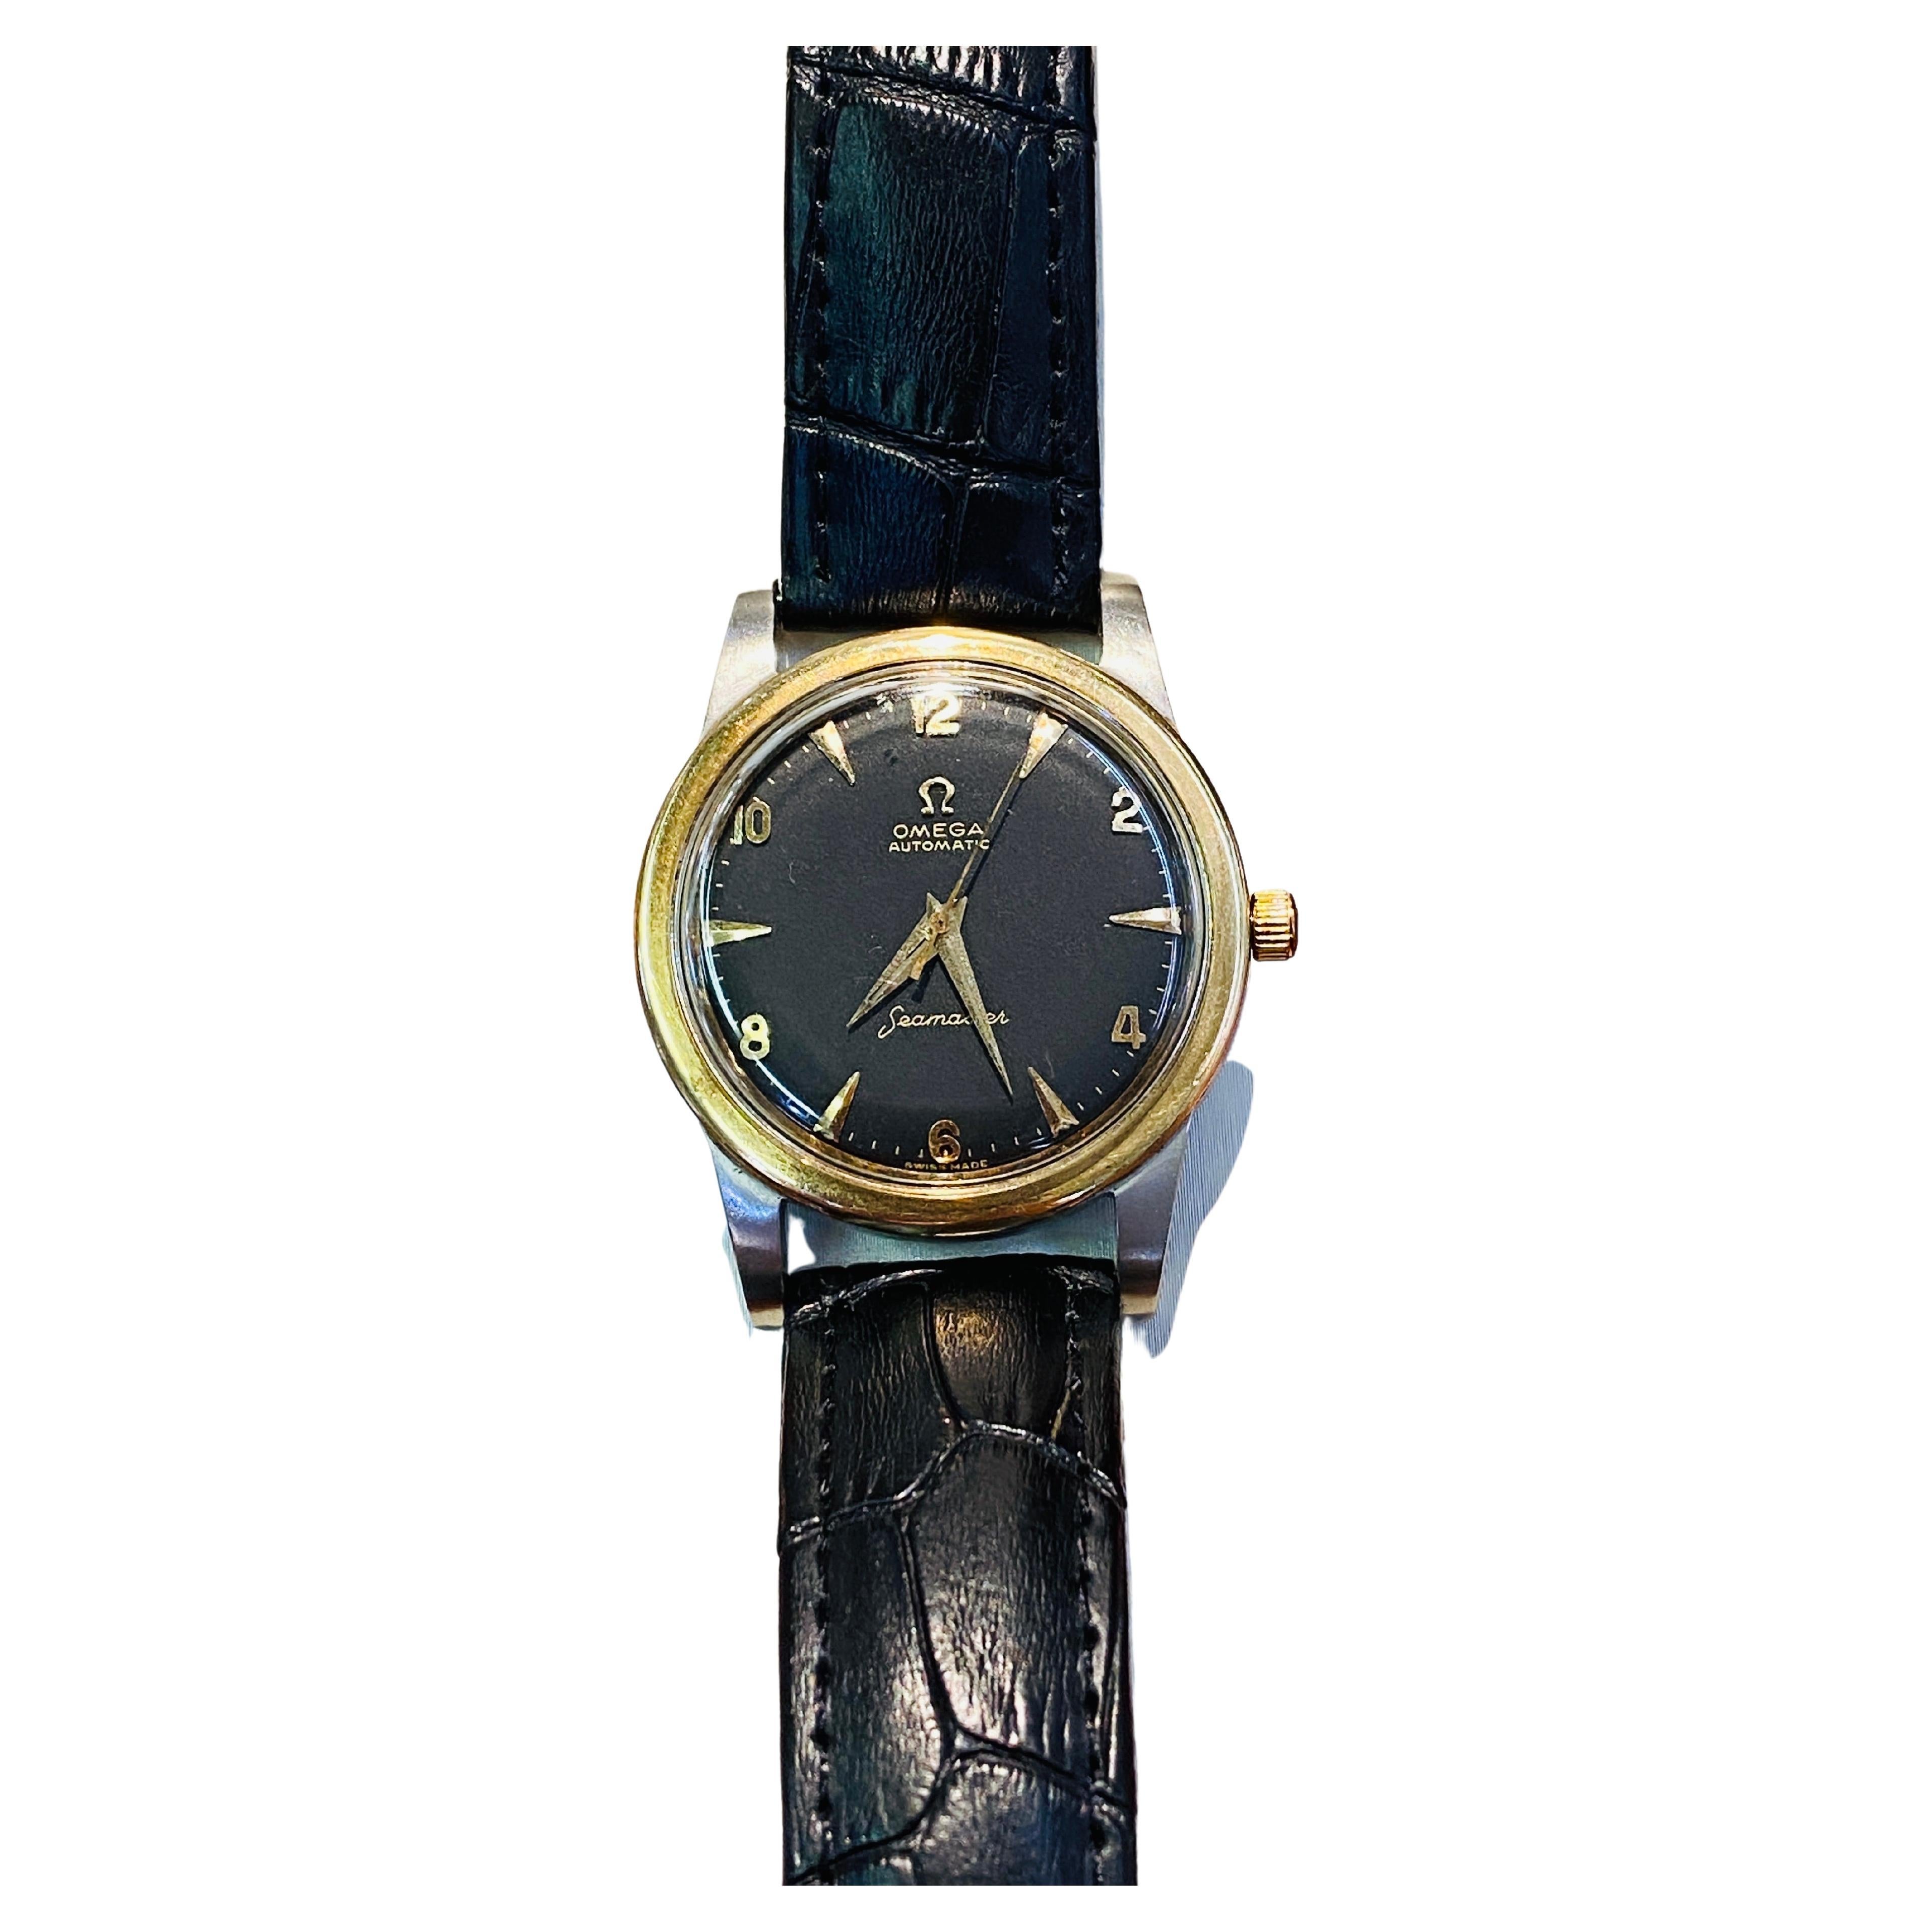 Vintage Omega Seamaster automatic men’s watch with 18k yellow gold crown, bezel and hands, black dial and black leather band. Case is stainless steel. Circa 1958.